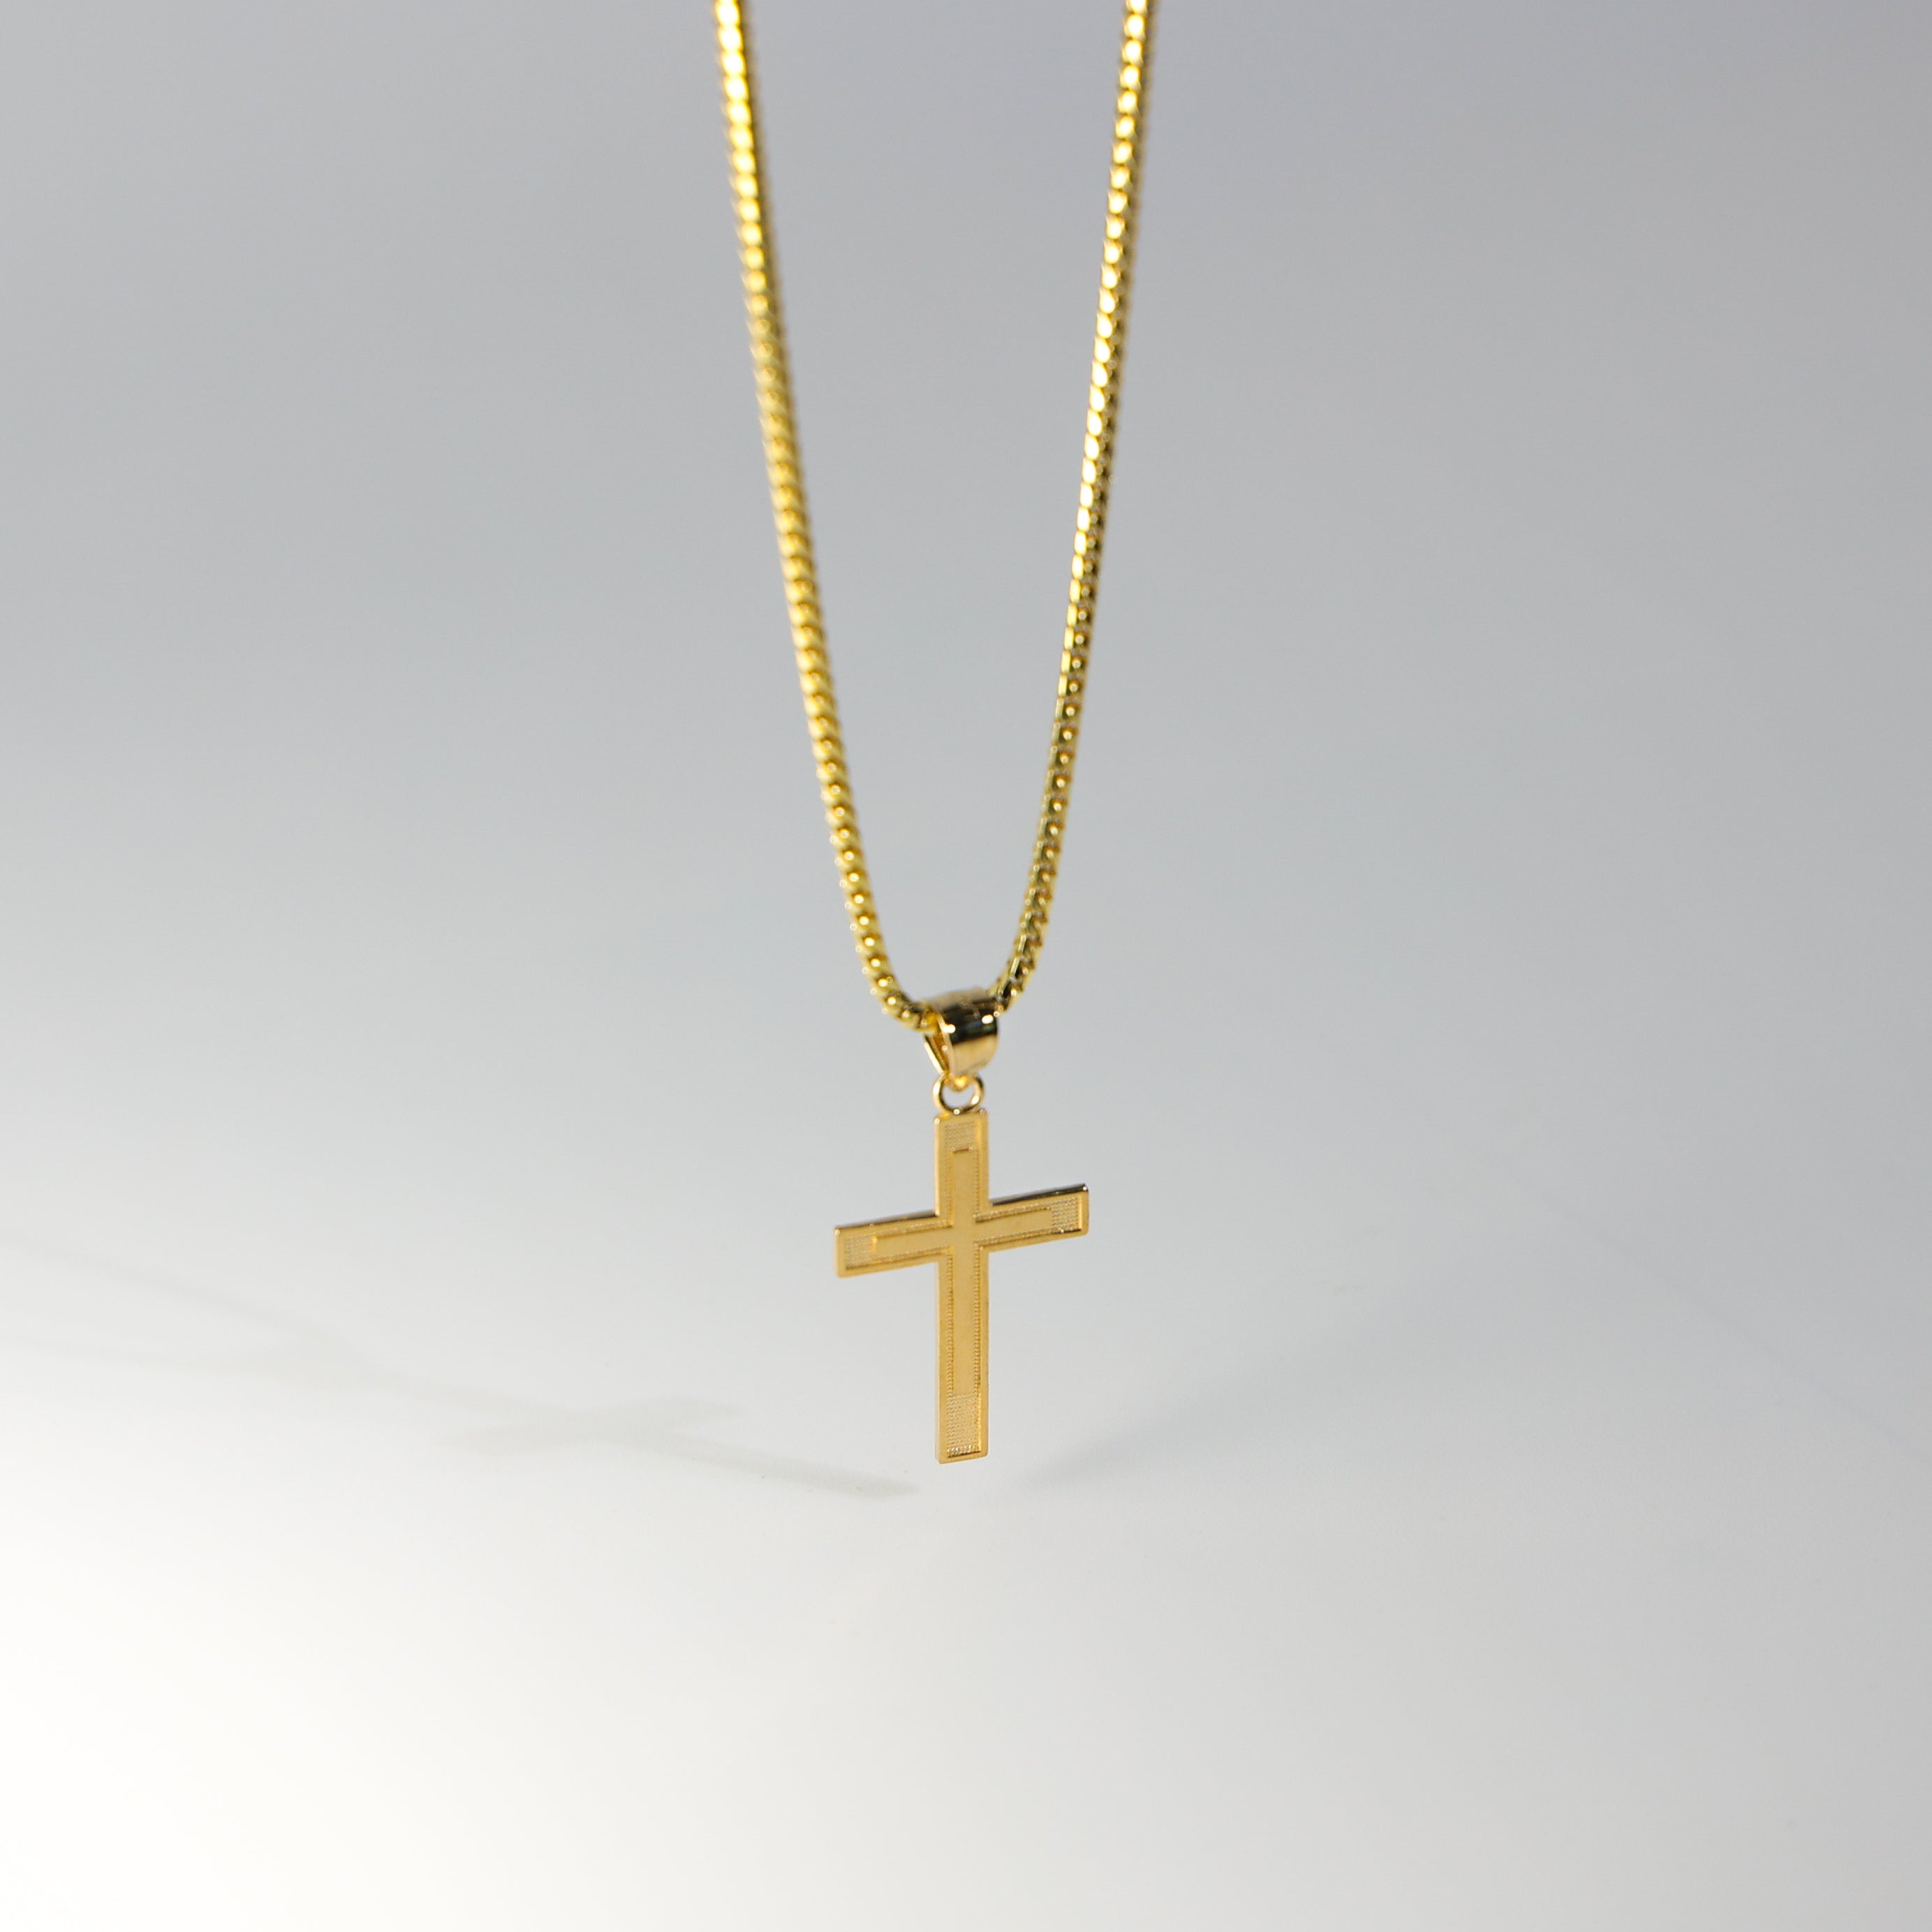 Gold Cross Within A Cross Pendant Model-129 - Charlie & Co. Jewelry